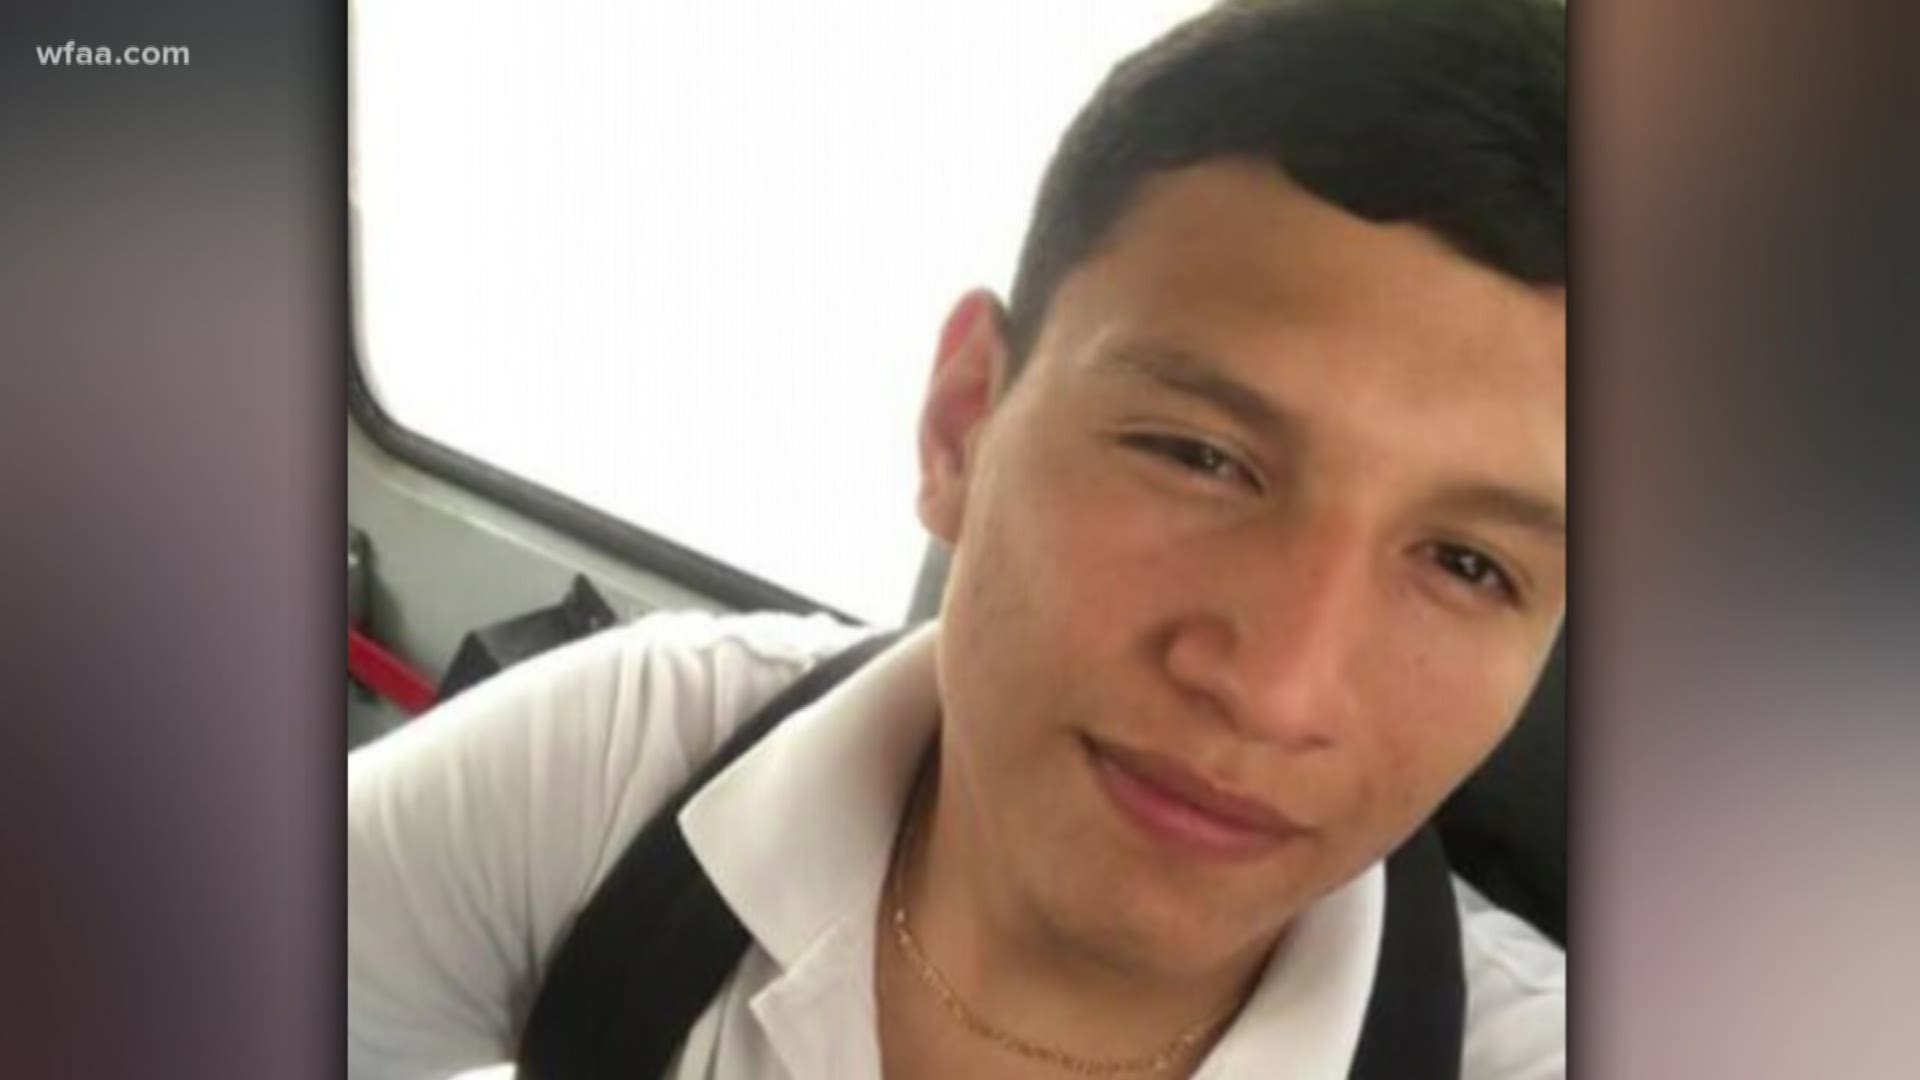 ICE releases Texas teen after wrongfully detained